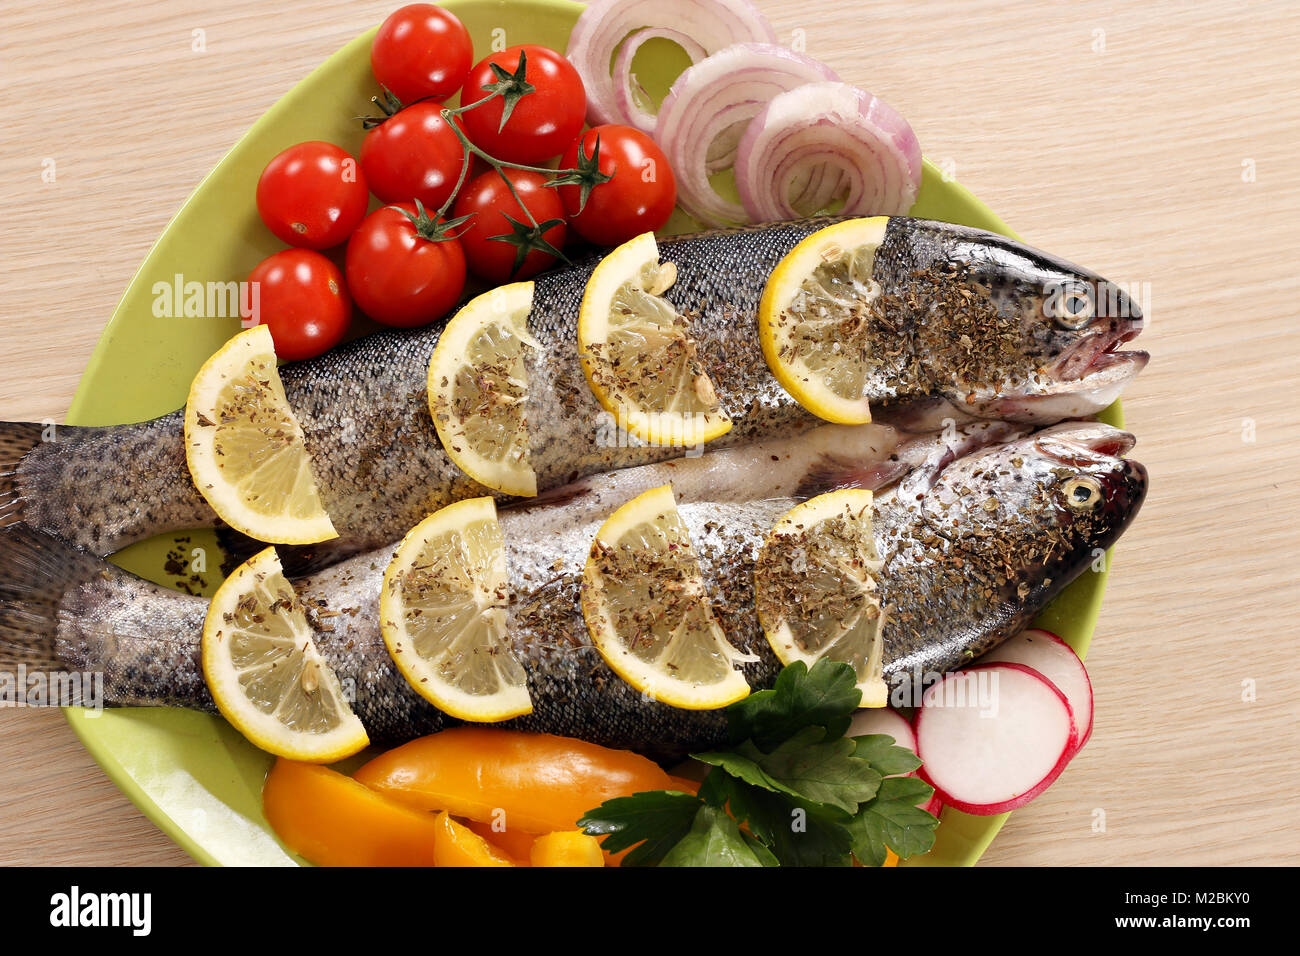 trout fish with vegetables on plate Stock Photo